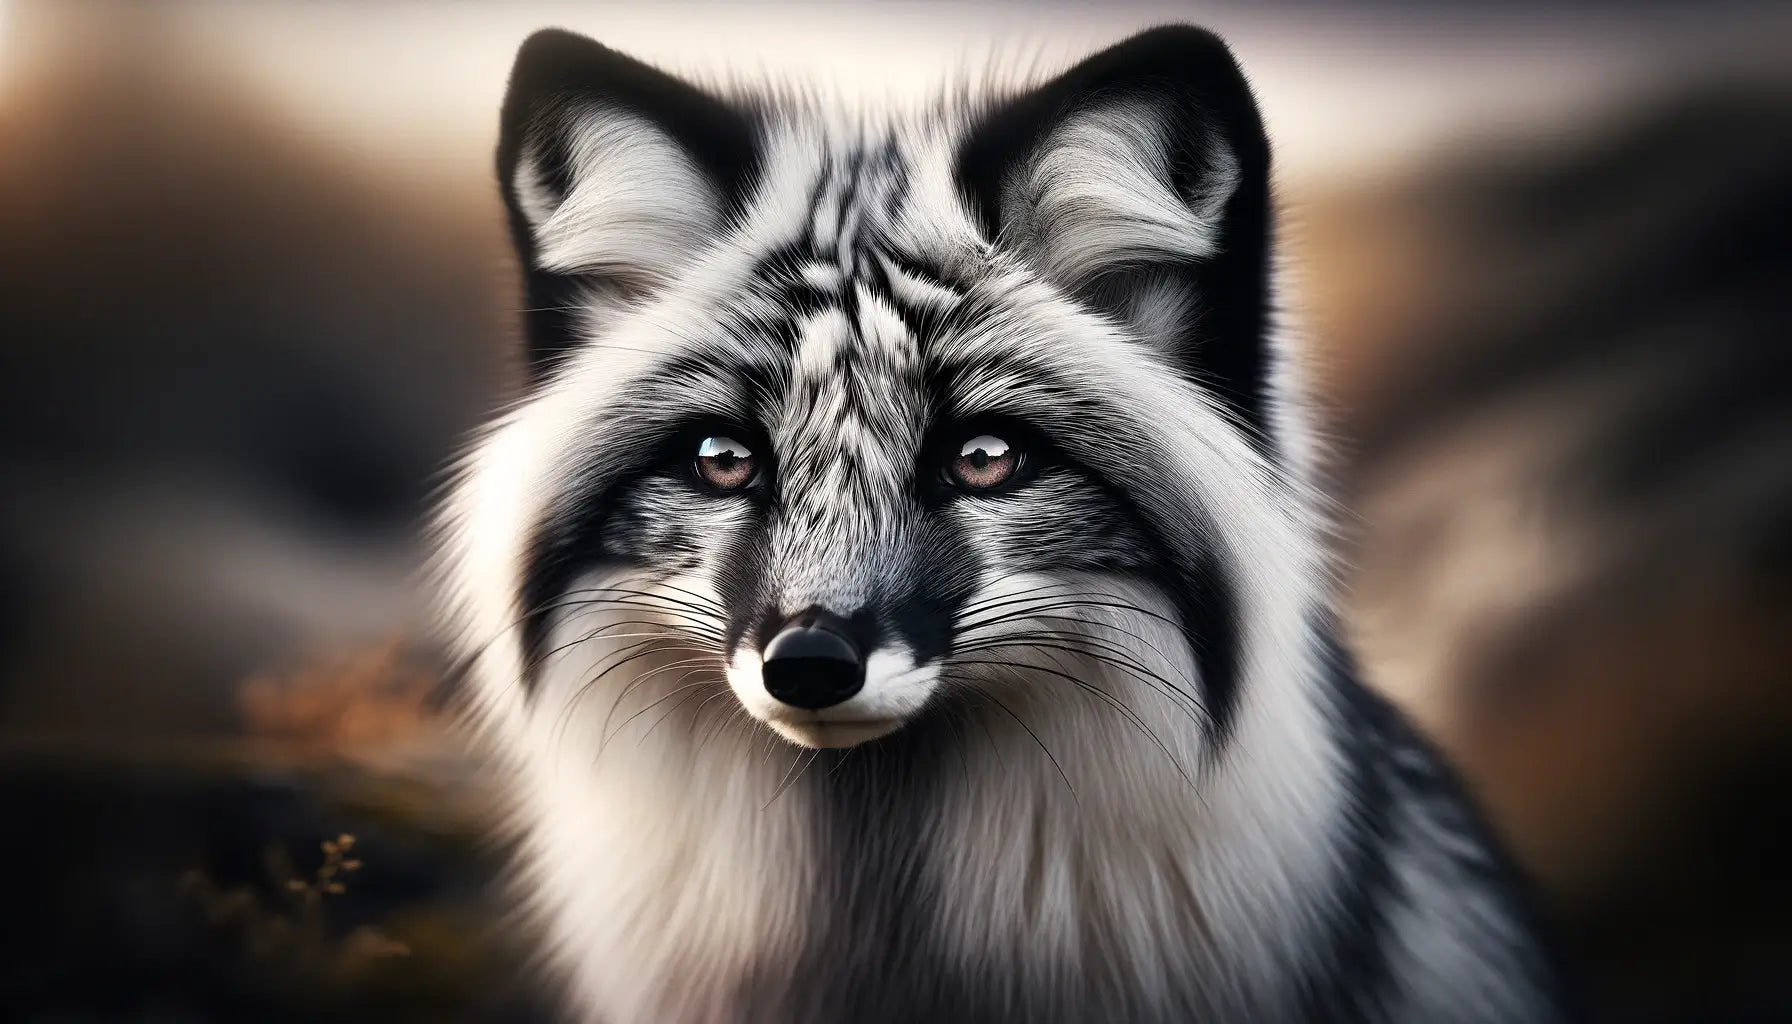 A Canadian Marble Fox with distinct facial patterns, especially the black markings around its eyes that stand out against the white fur.